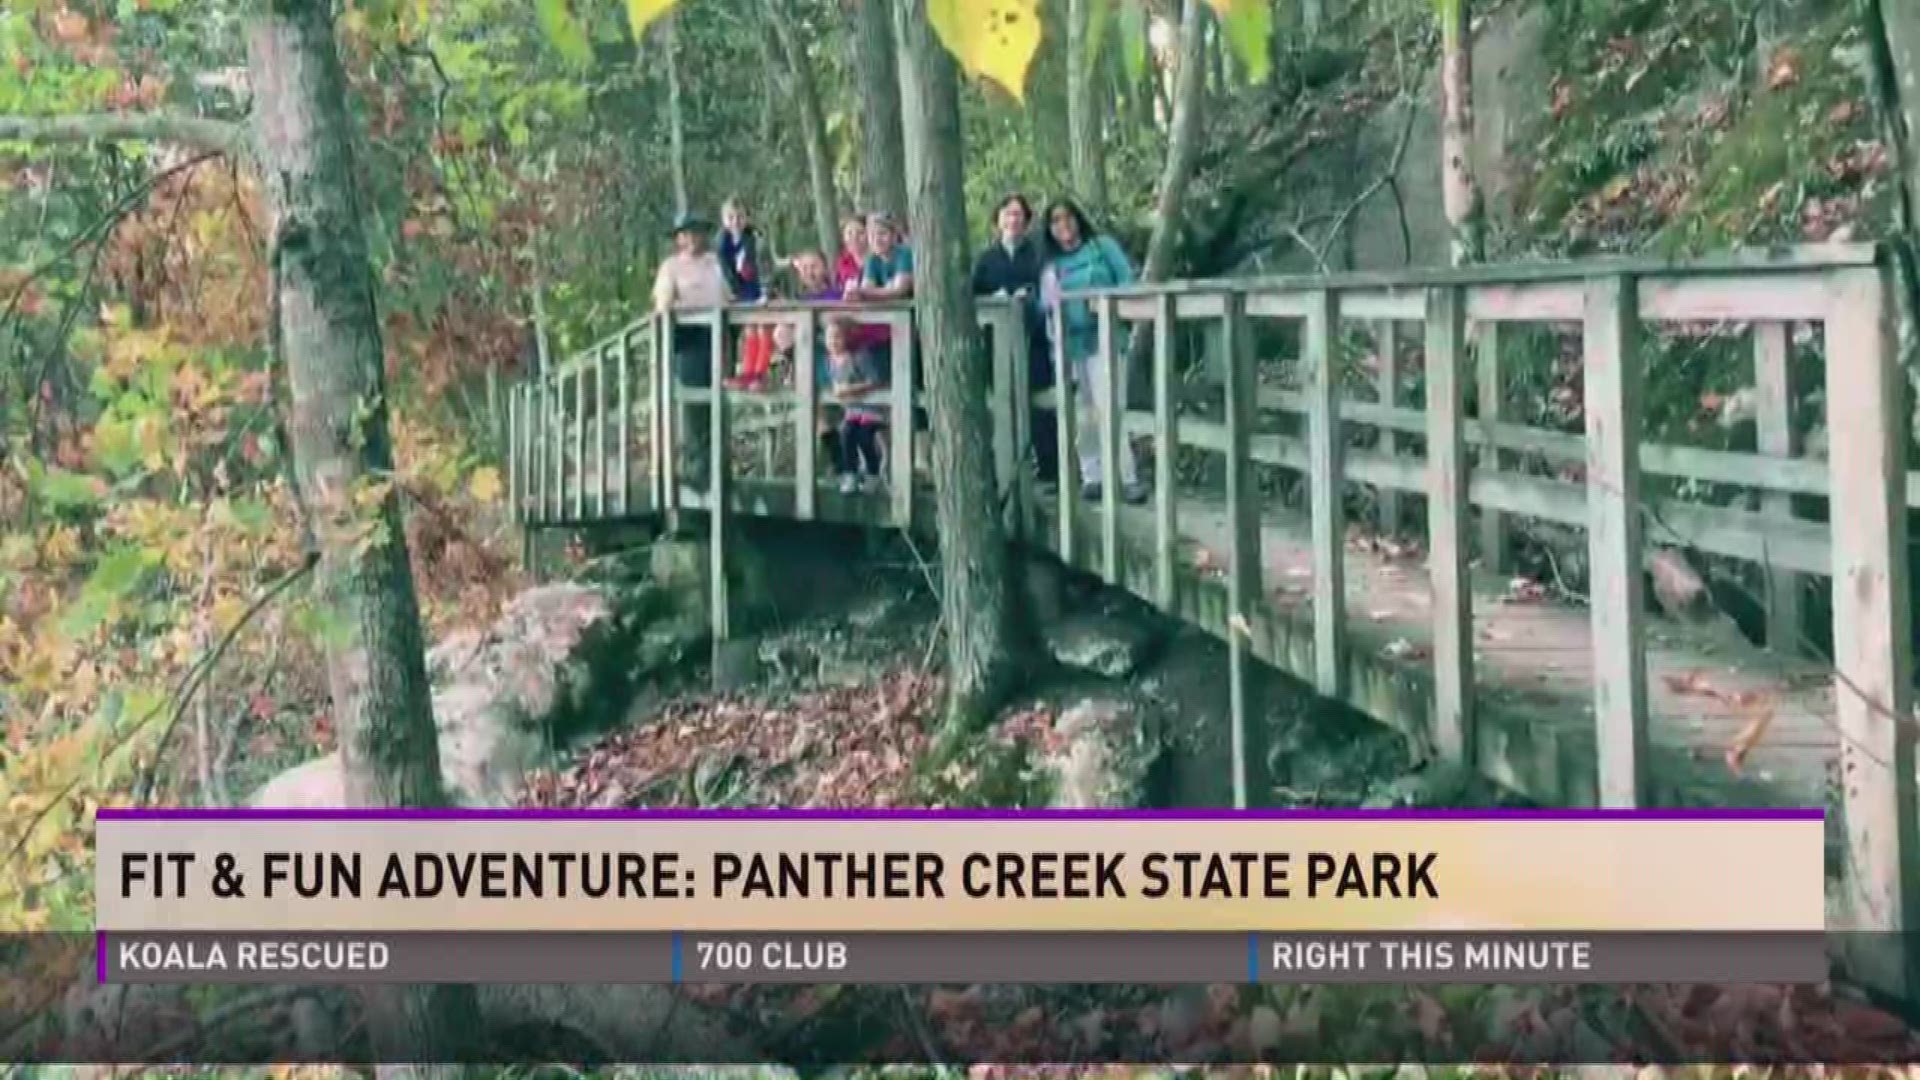 Fit & Fun Adventure: Panther Creek State Park